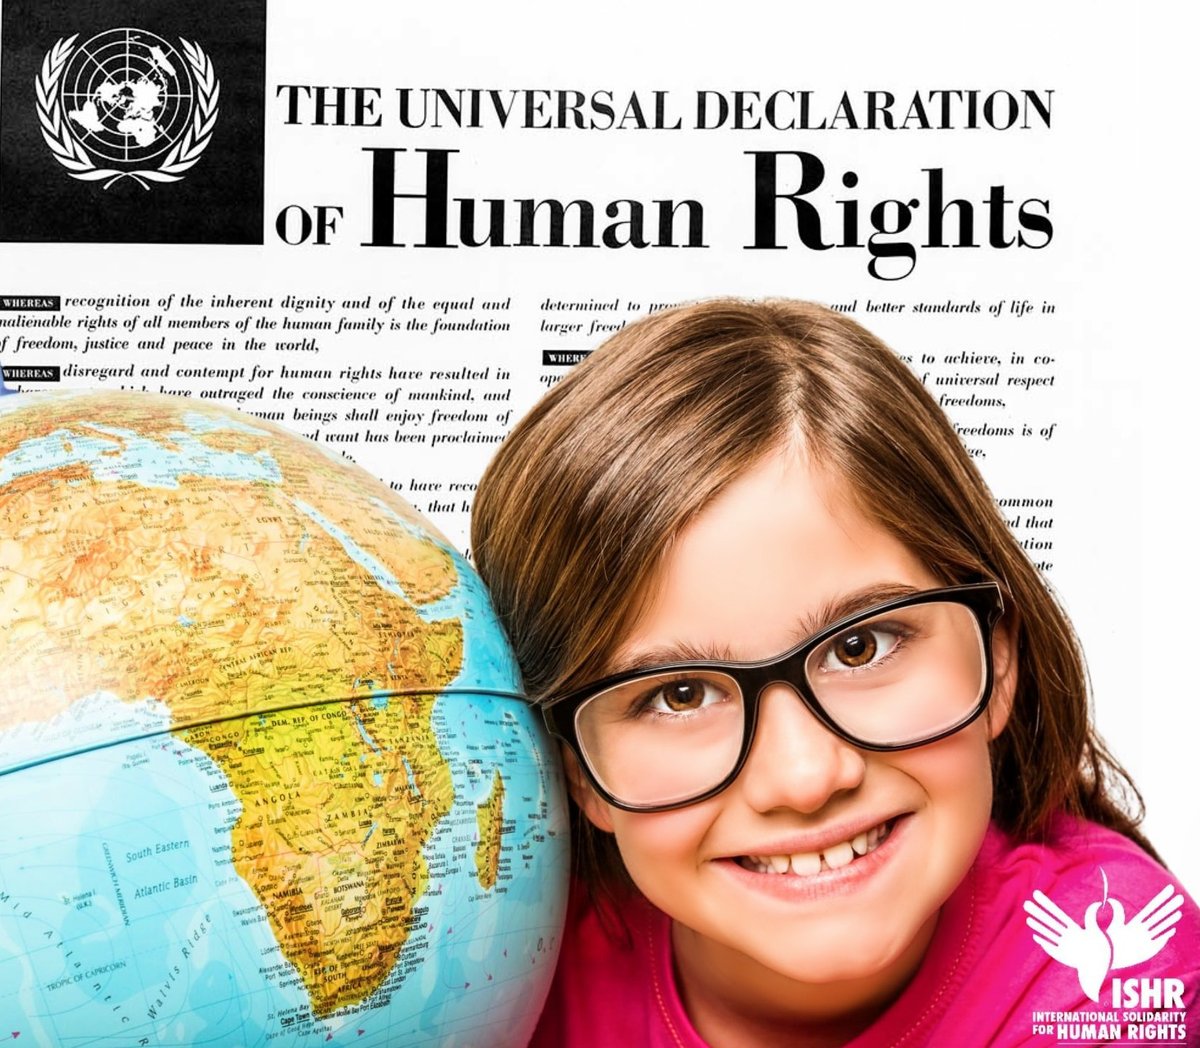 Human rights education will make children become responsible and global citizens. #humanrightseducation #globalcitizens